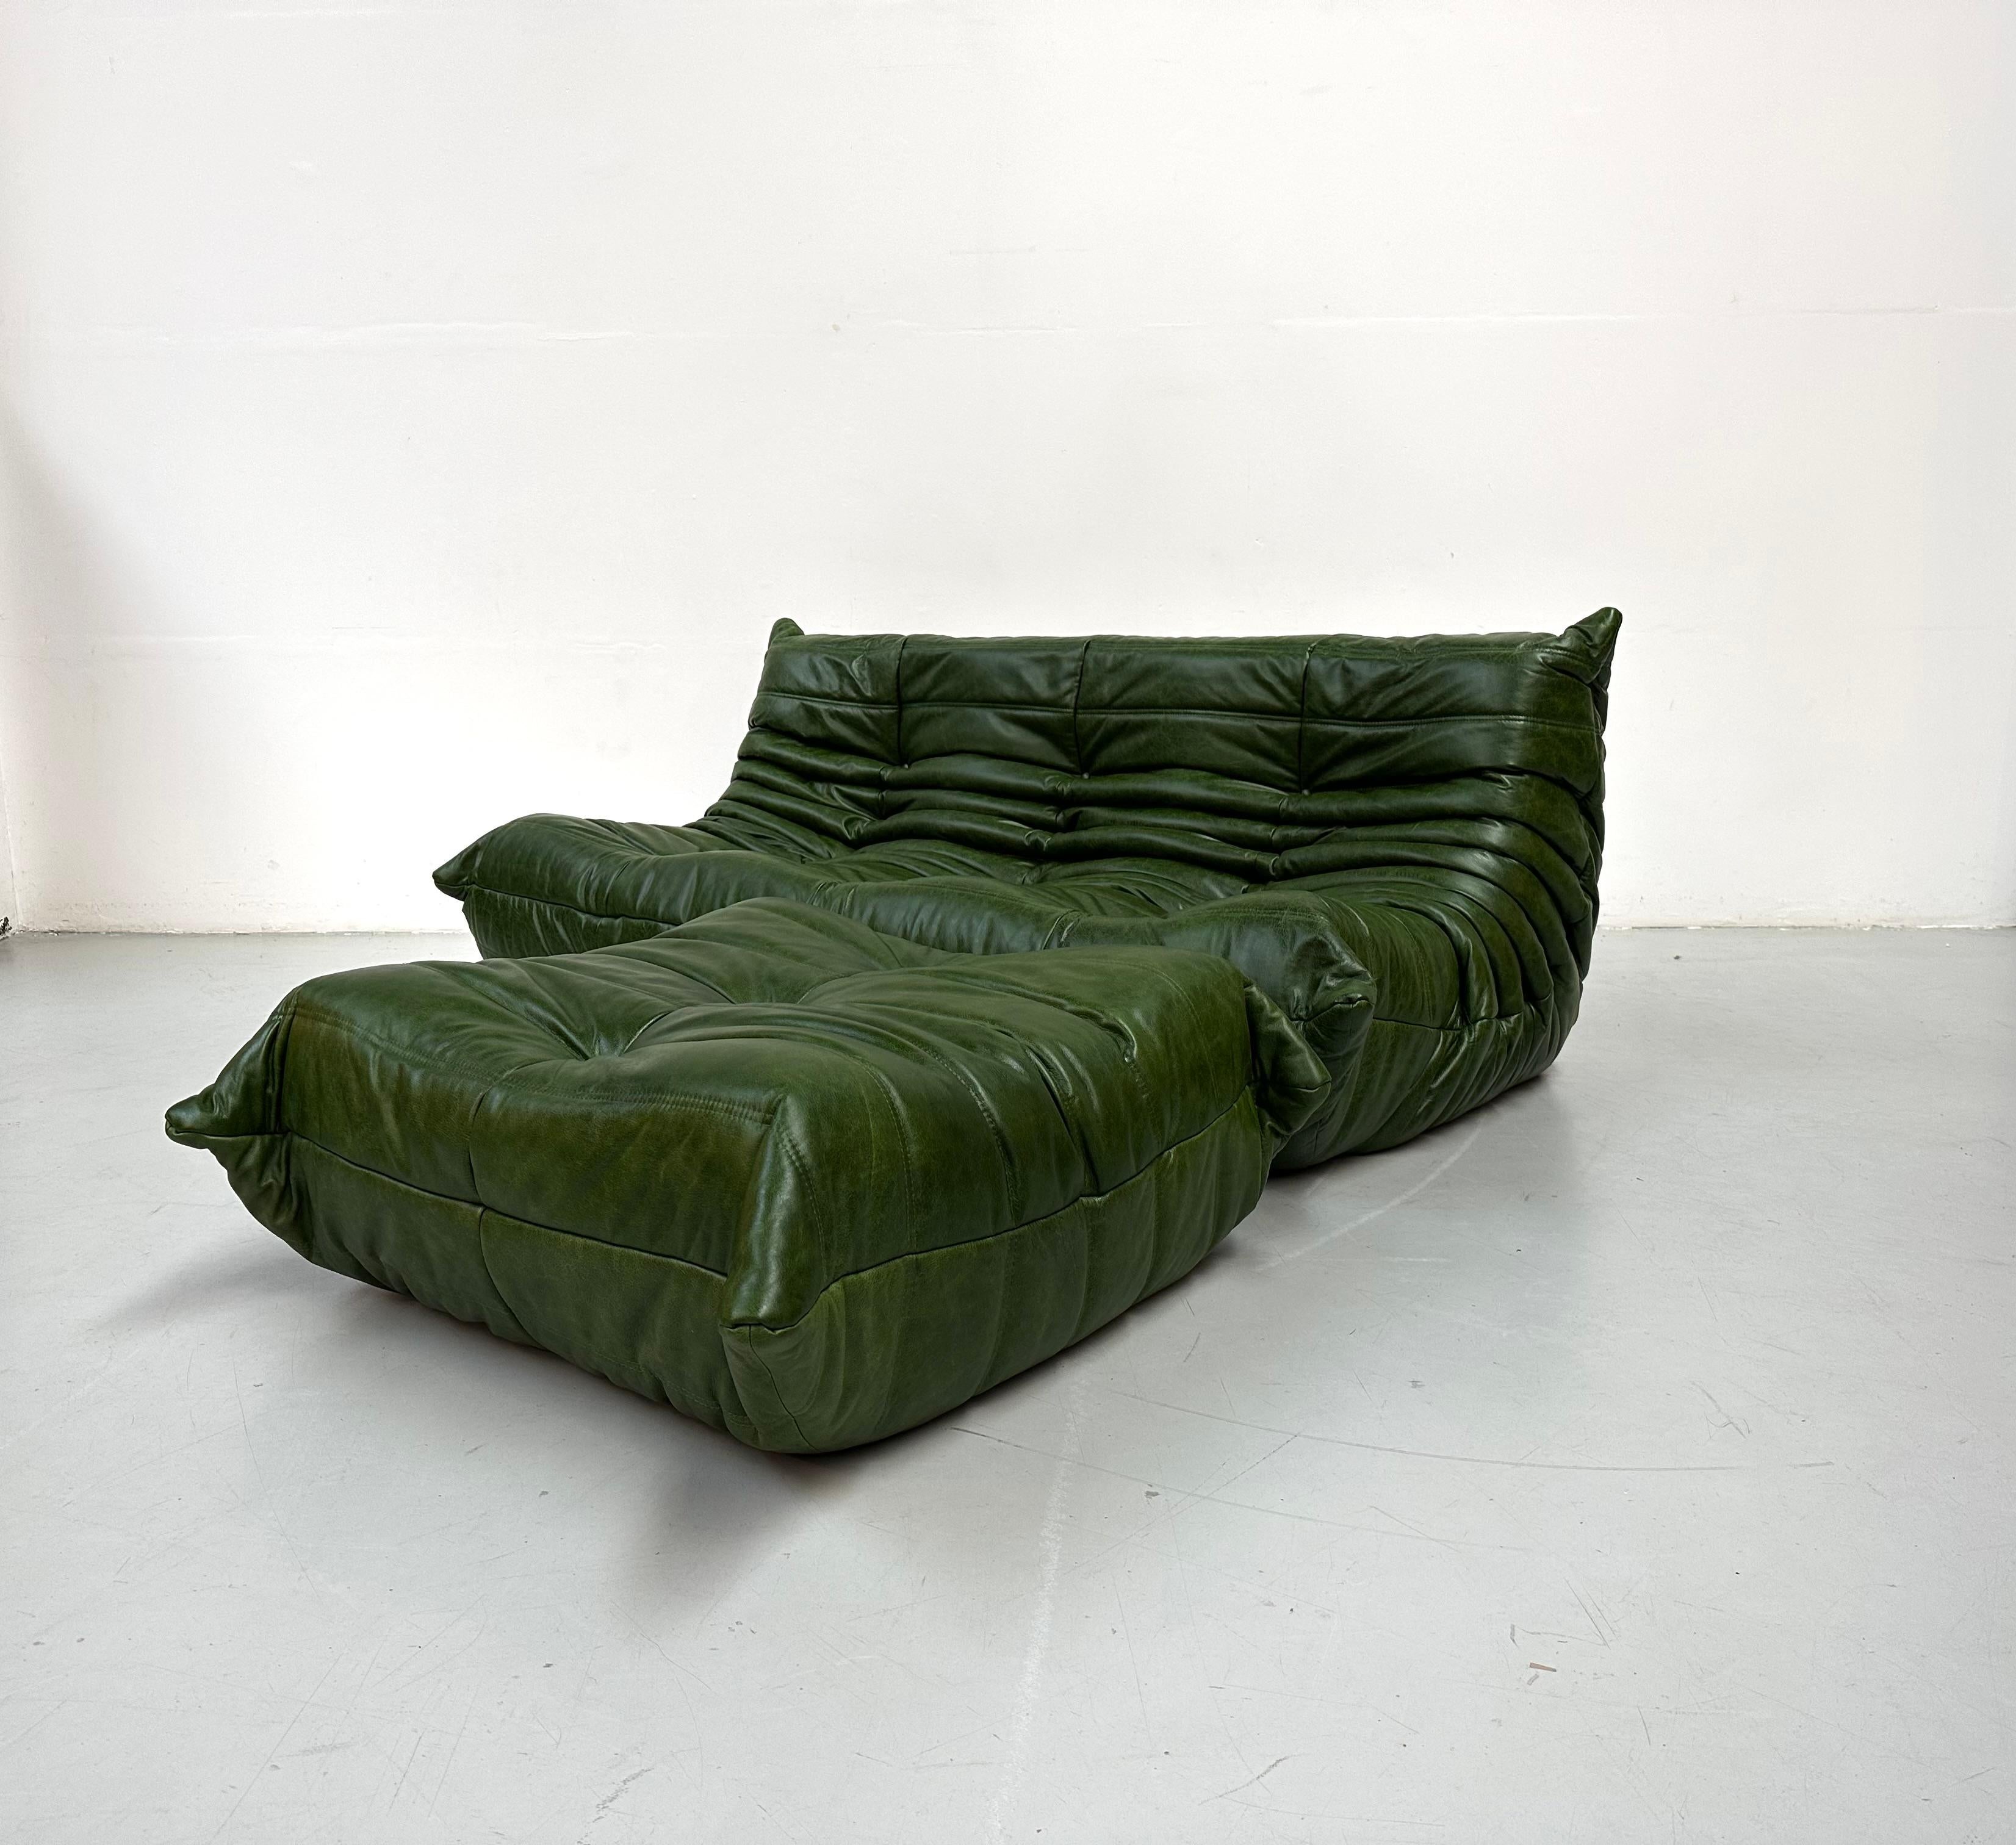 Mid-Century Modern French Togo Sofa with Ottoman in Green Leather by M.Ducaroy for Ligne Roset.